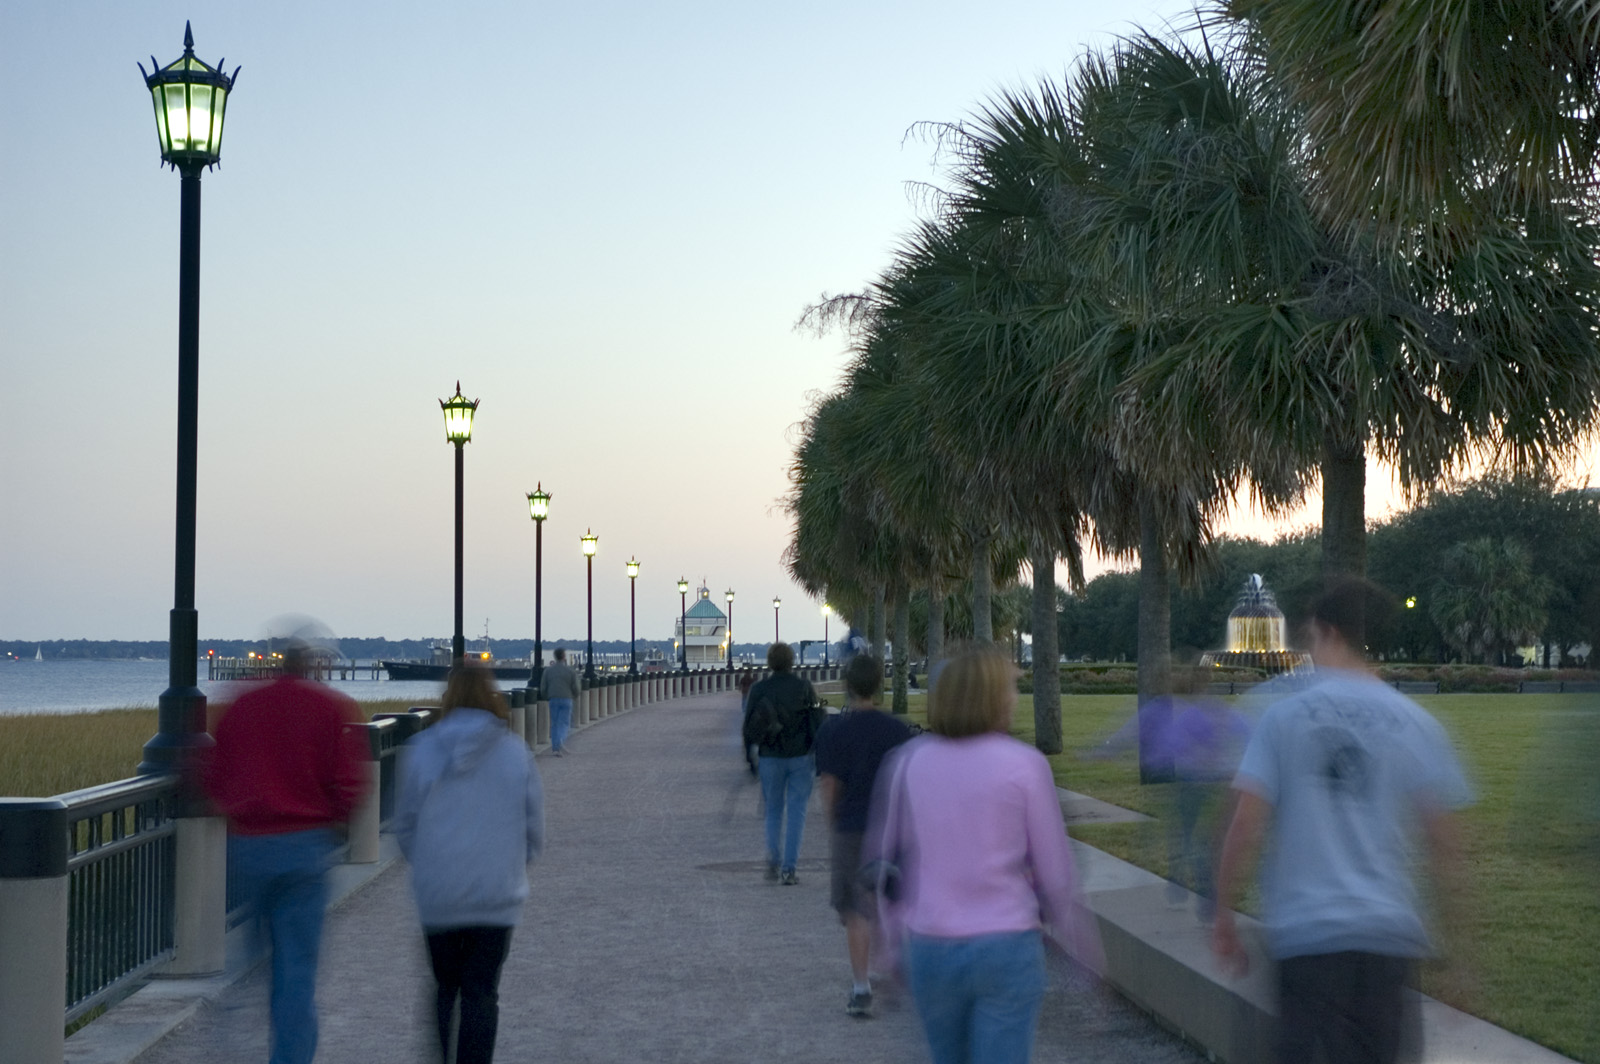 Photo of people walking along the waterfront path in the park